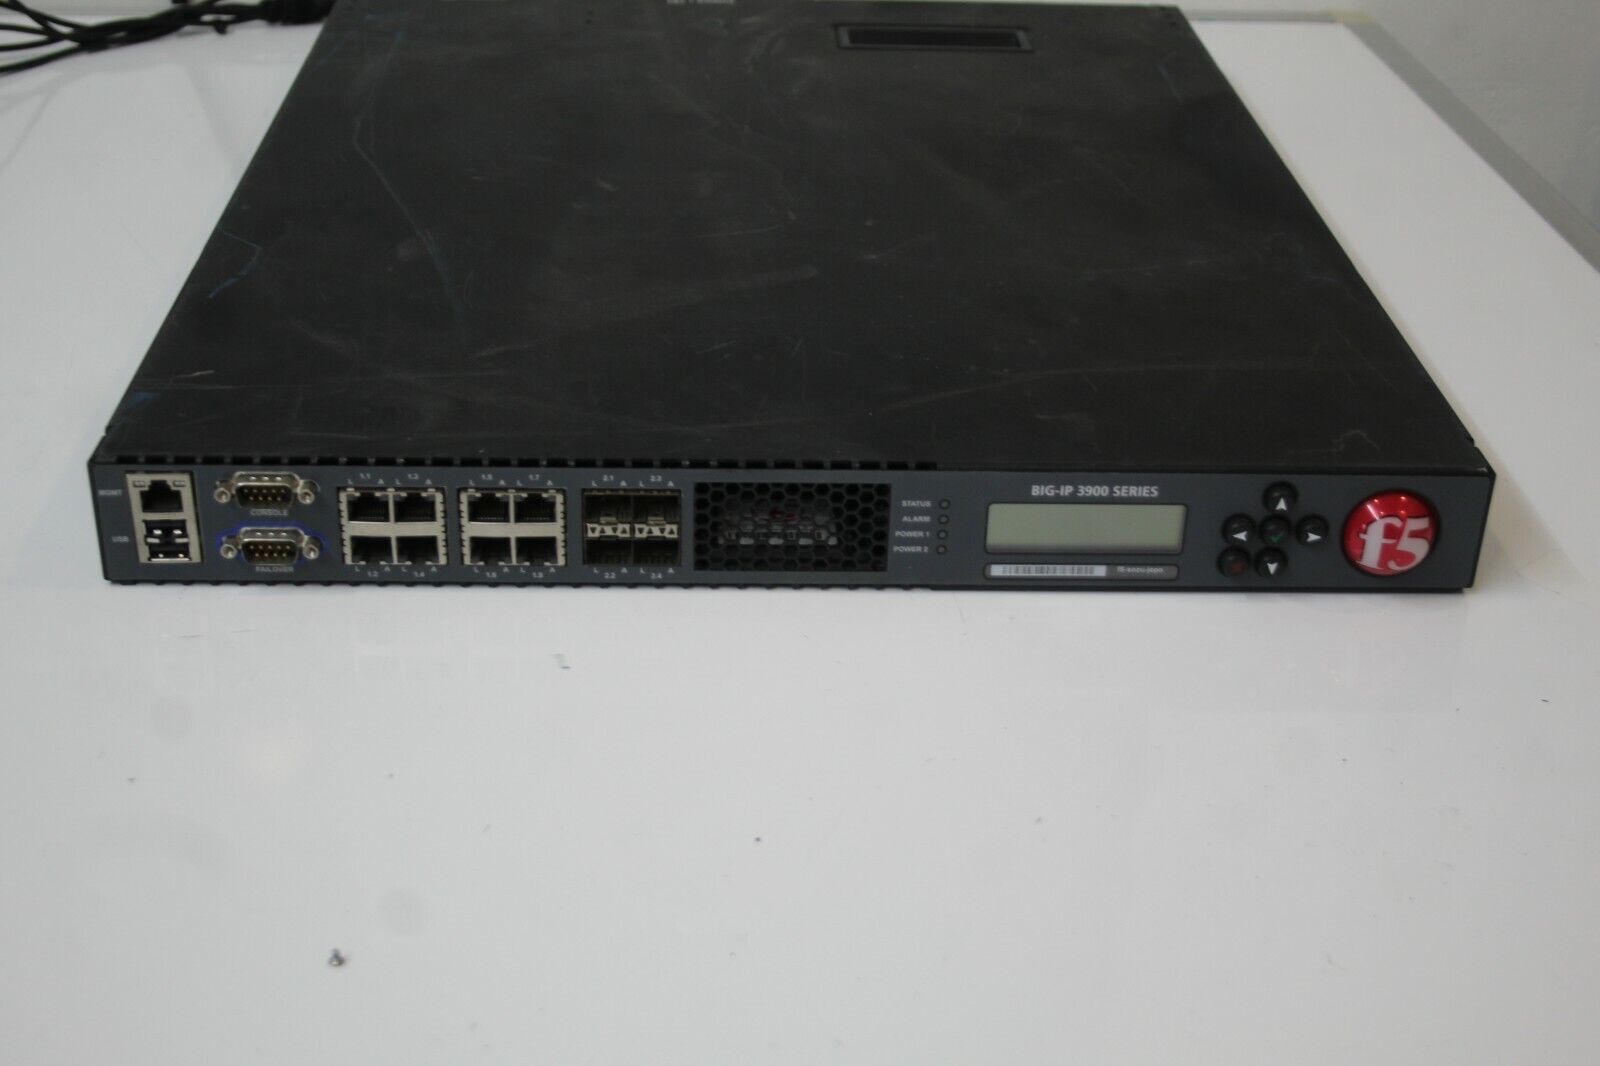 F5 Big-ip 3900 Traffic Manager Load Balancer With 1 Power Supply Unit Unwiped